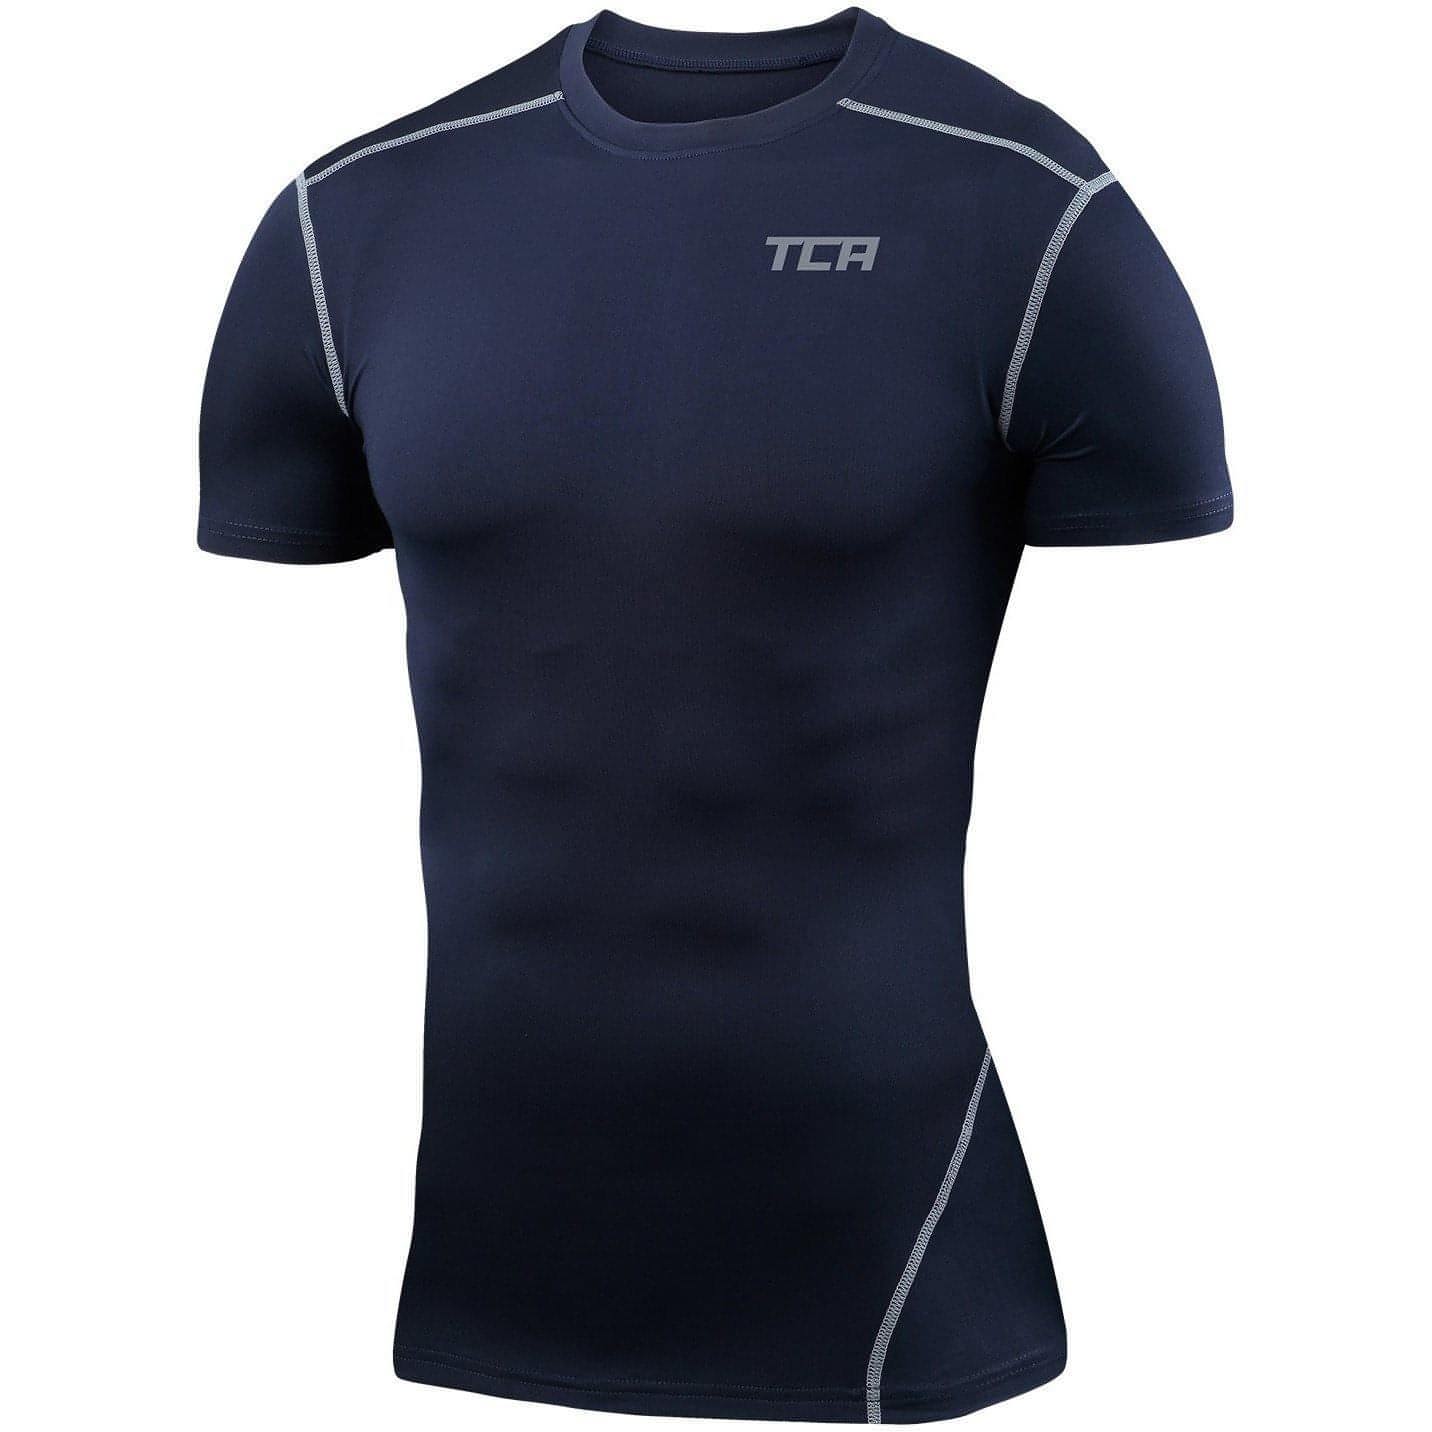 TCA Pro Performance Compression Junior Short Sleeve Thermal Running Top - Blue - Start Fitness